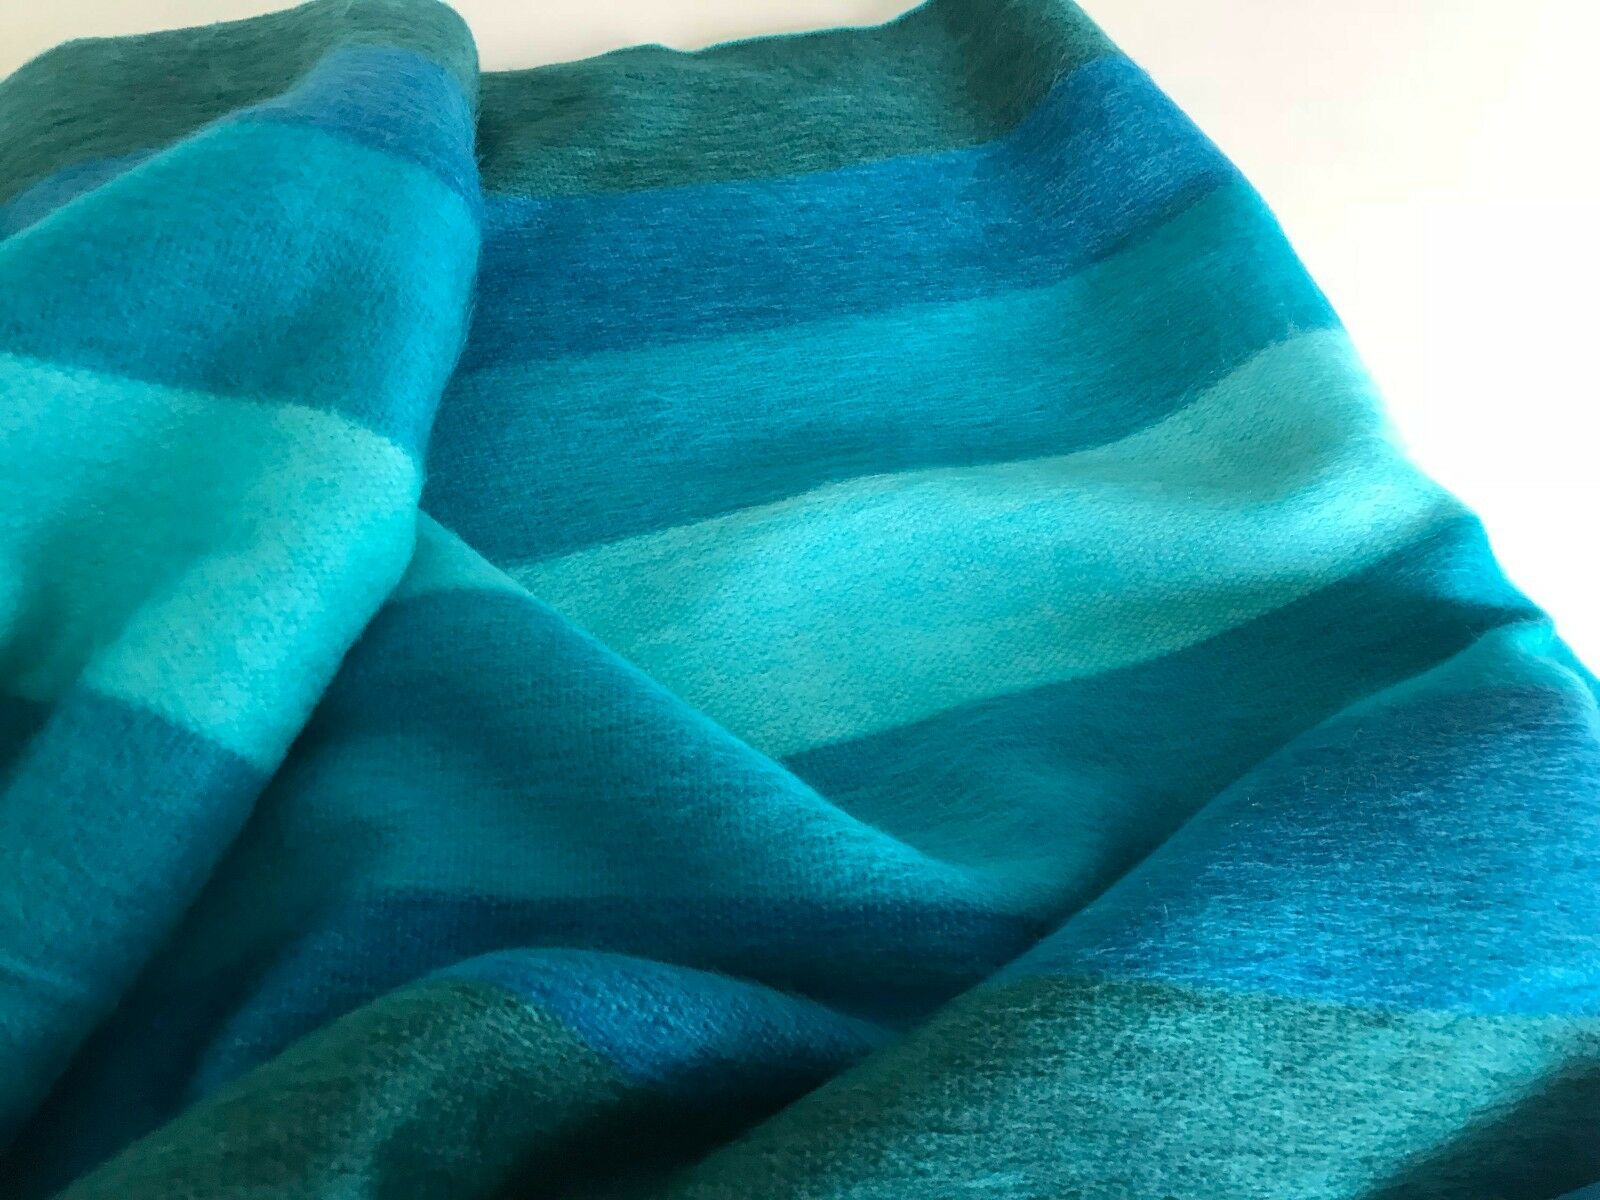 Cajabamba - Baby Alpaca Wool Throw Blanket / Sofa Cover - Queen 90" x 65" - thick stripes pattern blue-turquoise